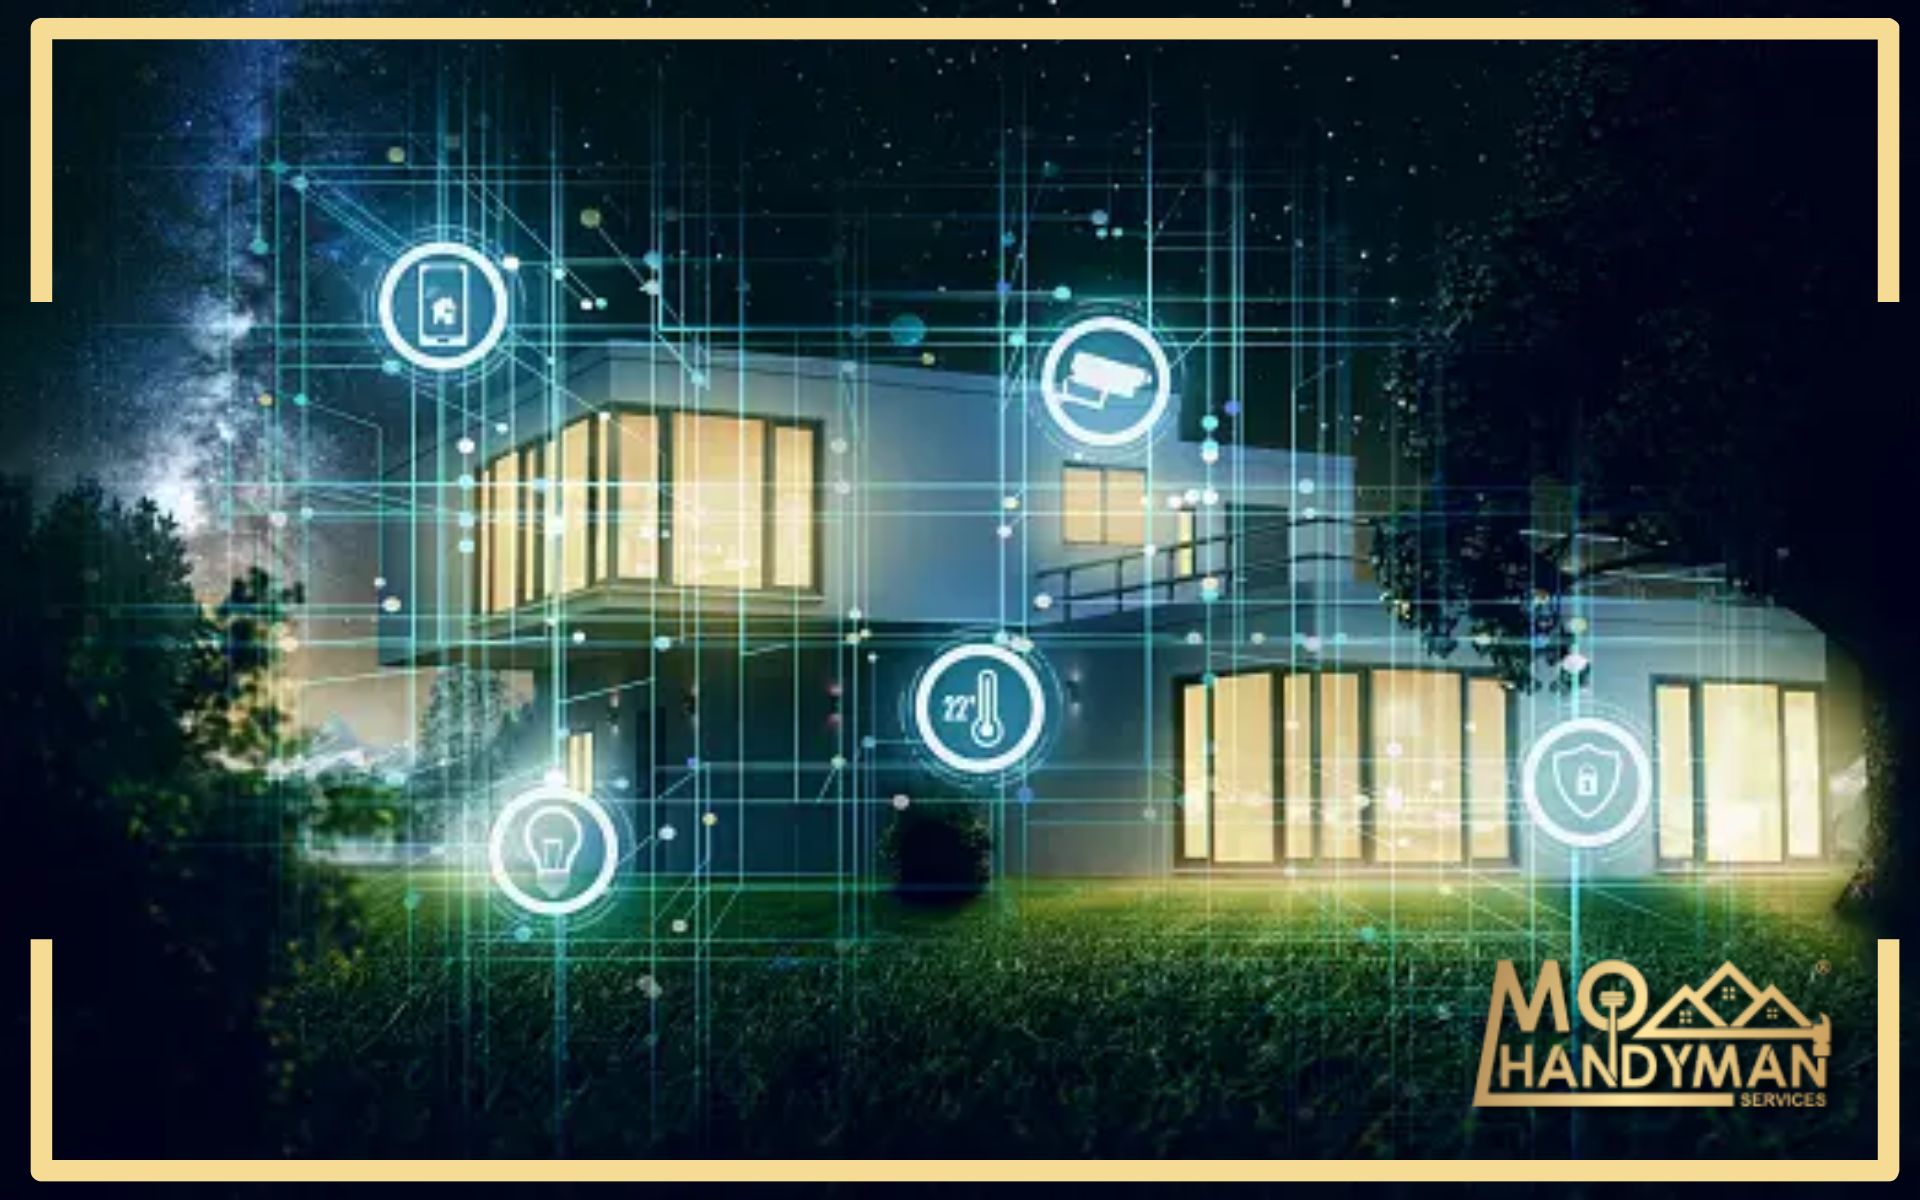 Energy-efficient smart home solutions by Mo Handyman Services, showcasing eco-friendly and cost-saving home innovations